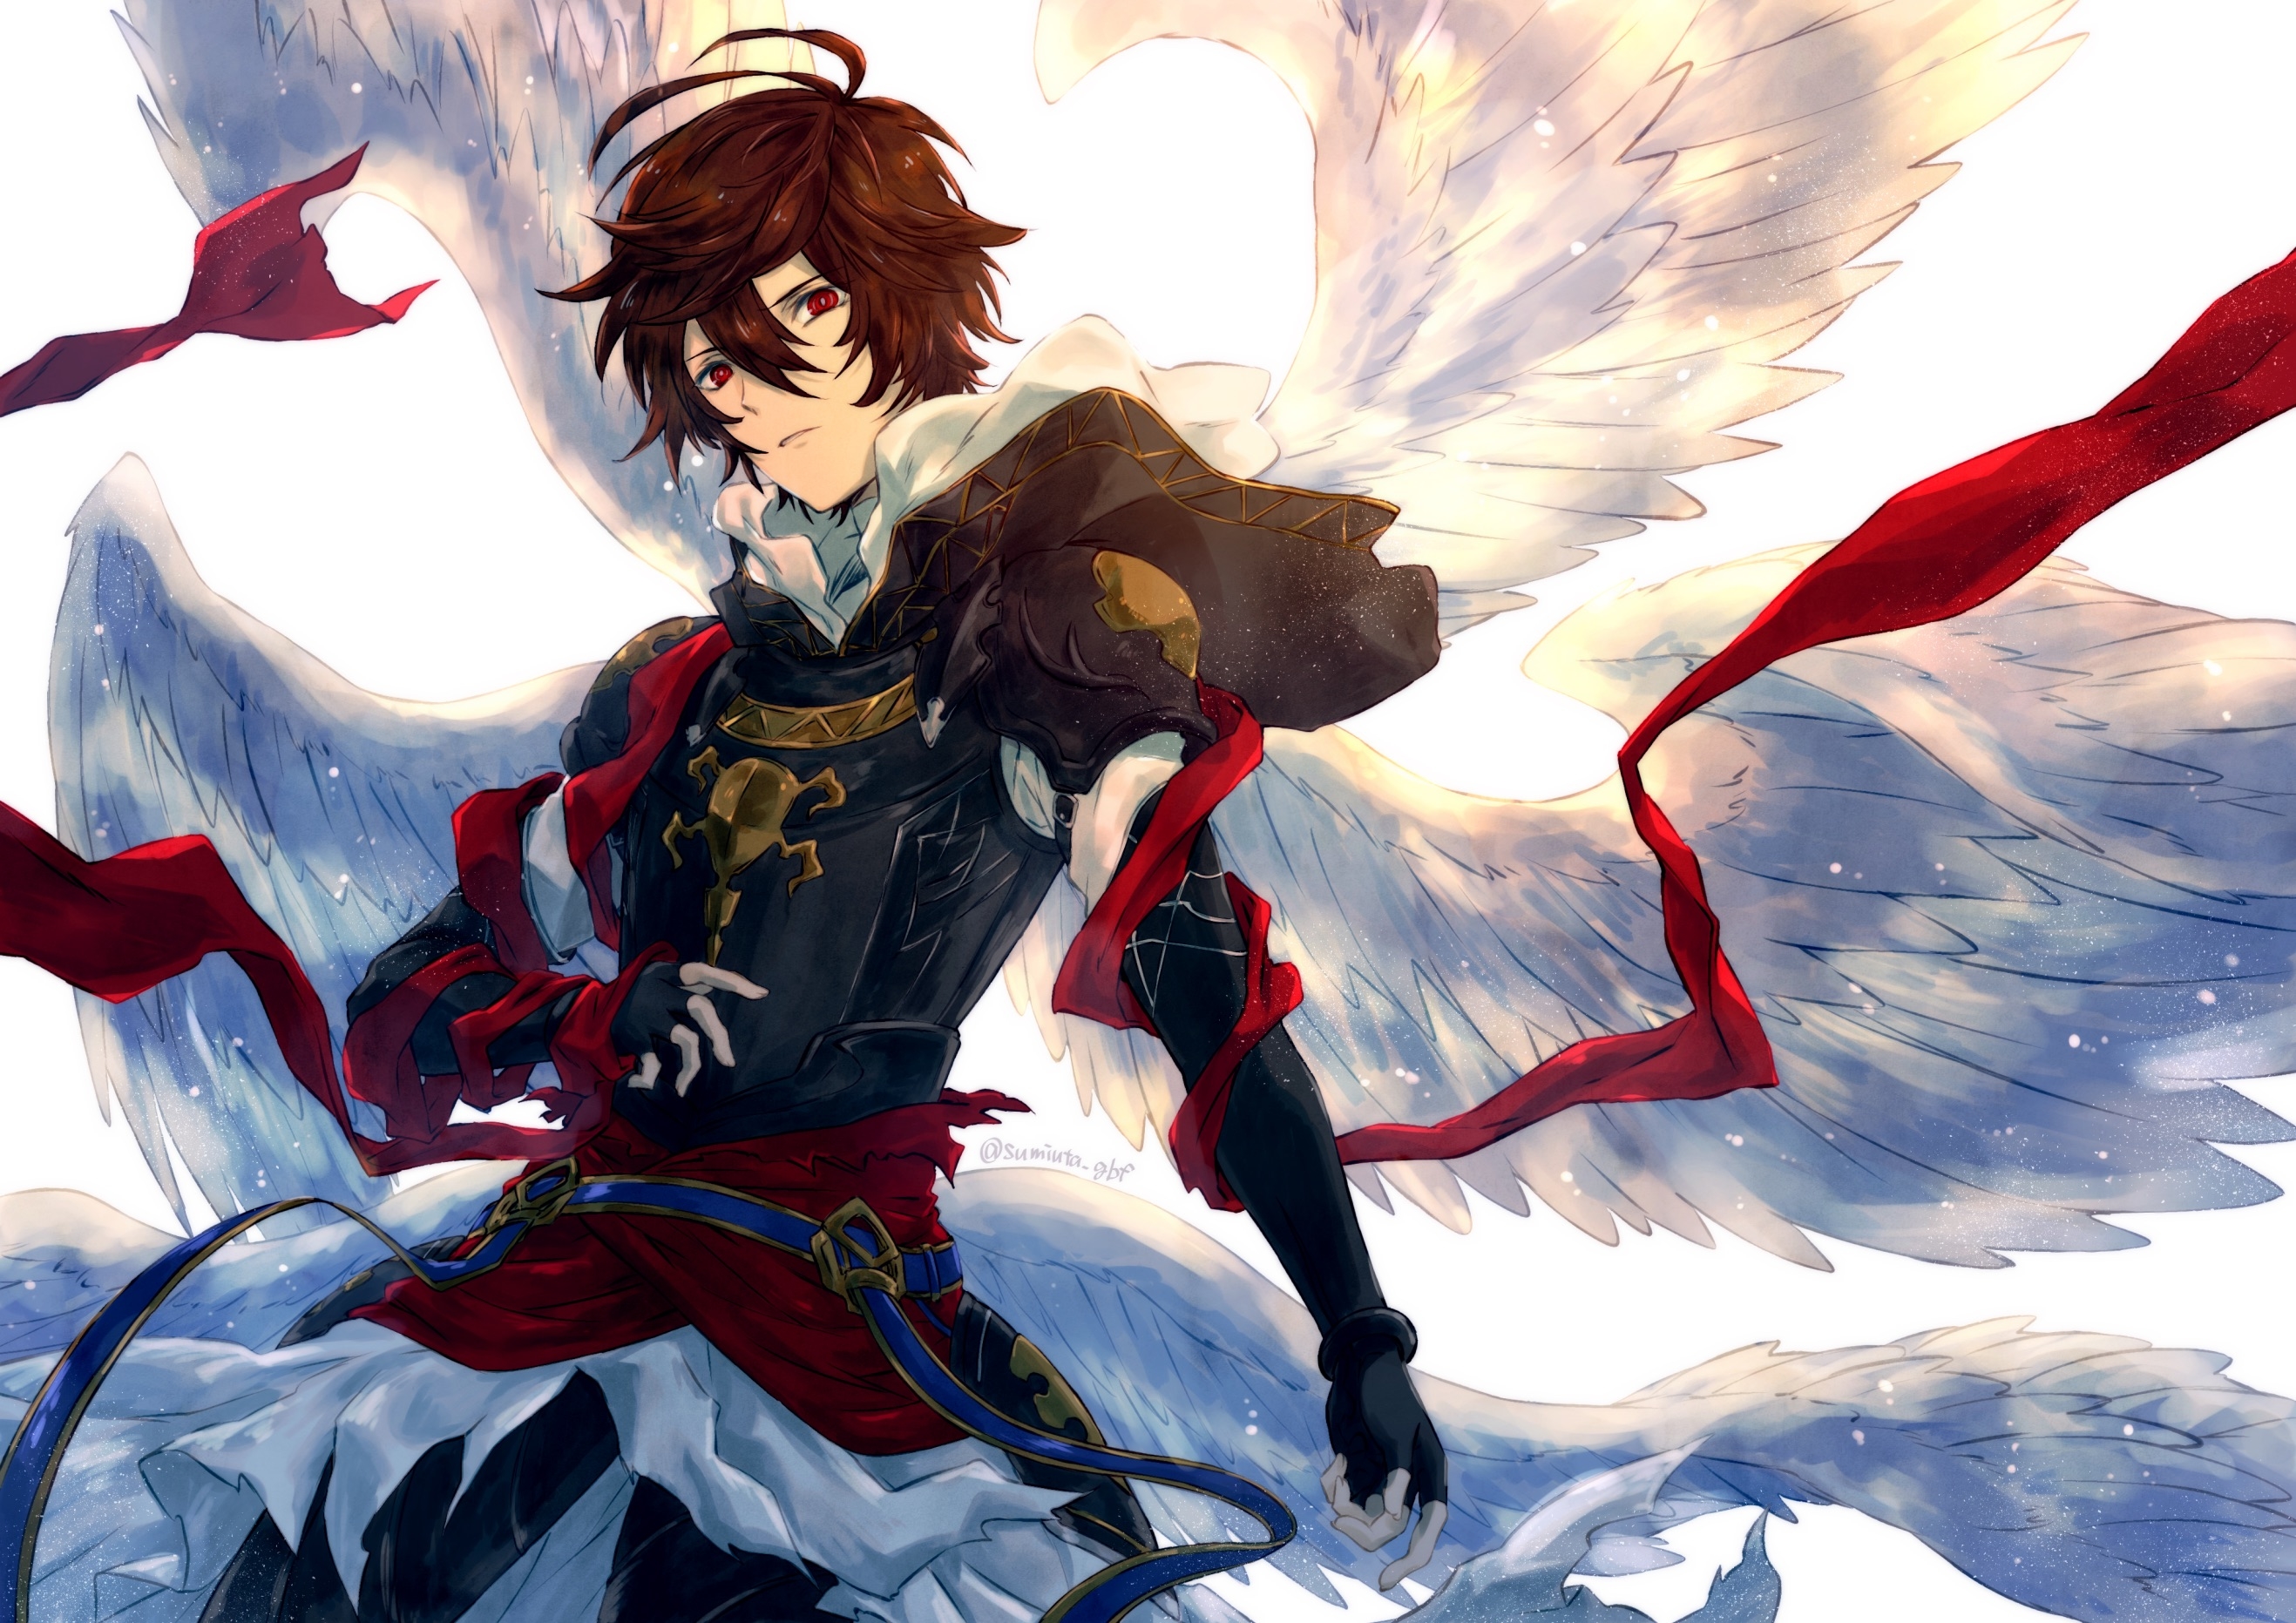 Sandalphon Granblue Fantasy Wallpaper Hd Anime 4k Wallpapers Images Photos And Background